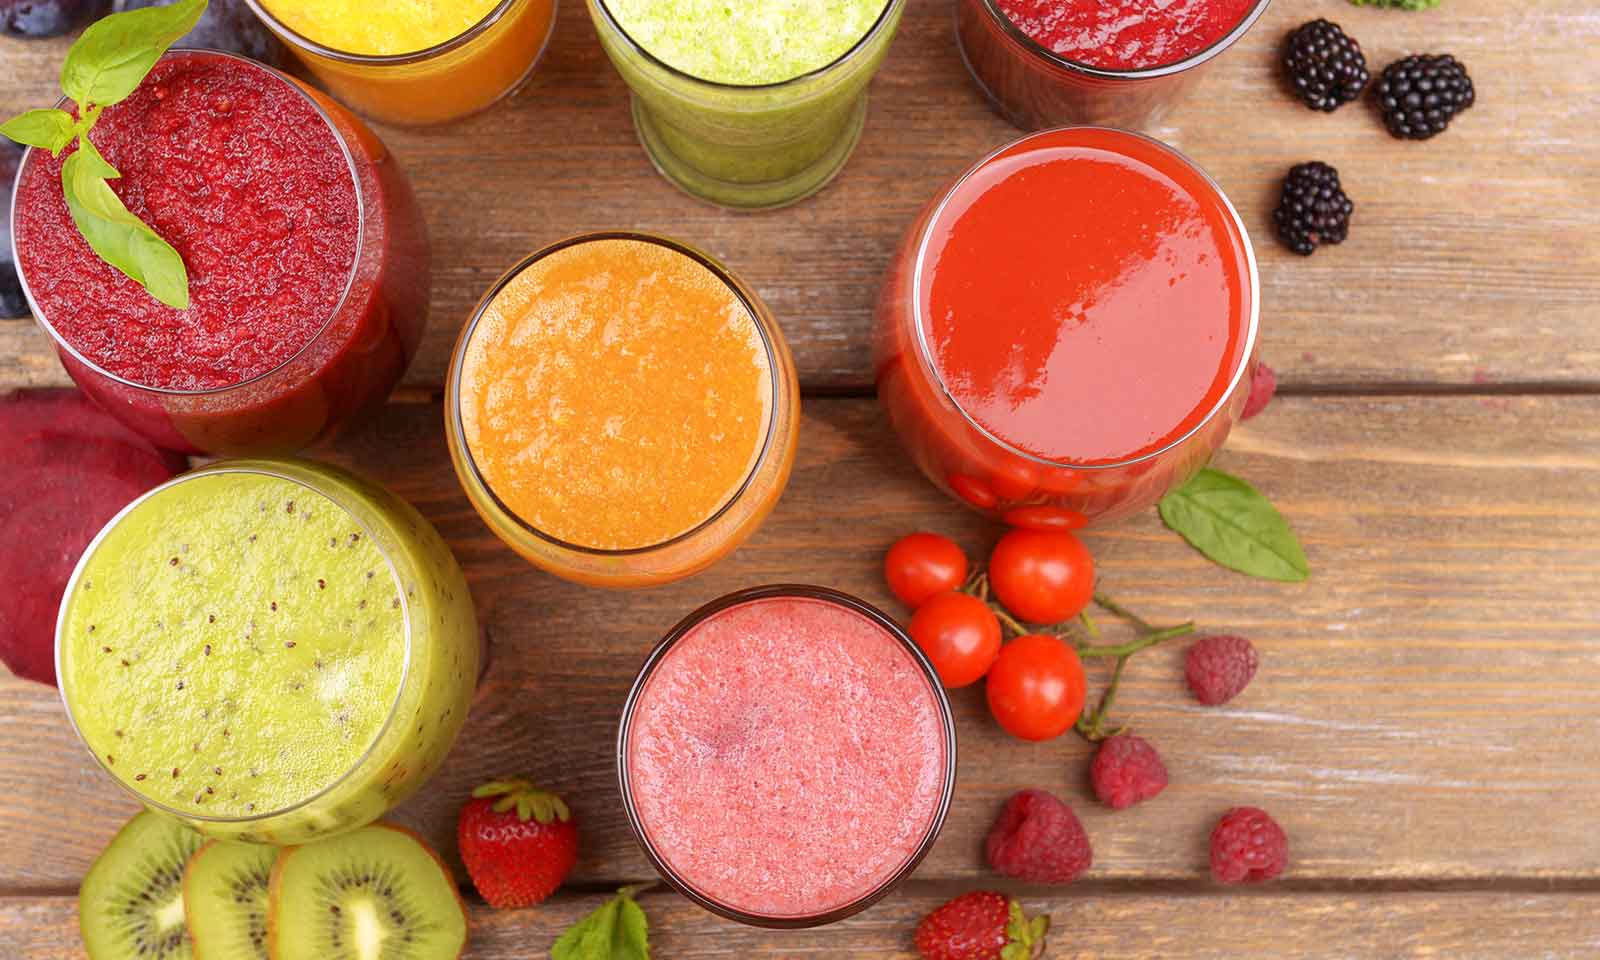 Juicing – Health Benefits And Some Handy Tips